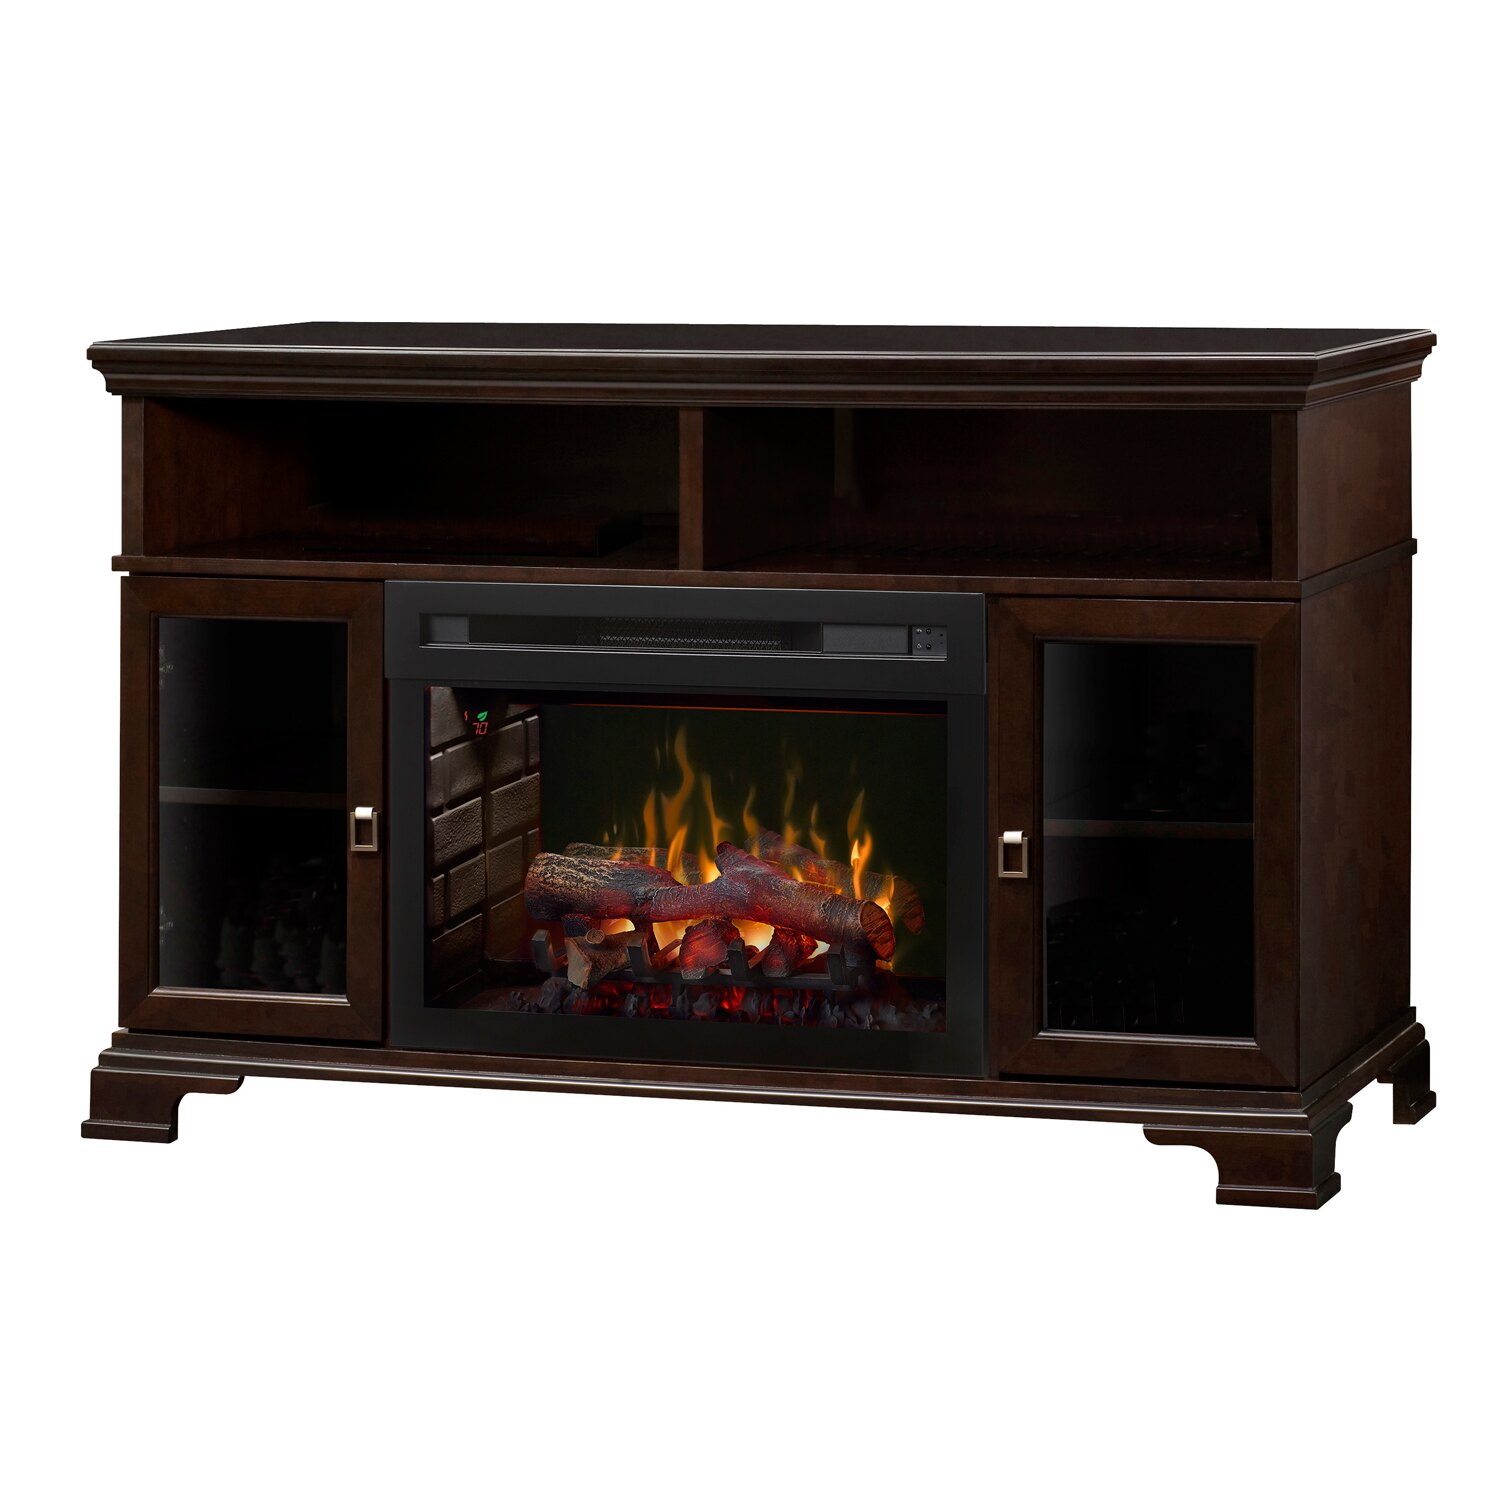 18 Inch Electric Fireplace Insert Unique Dimplex Electric Fireplace Brookings with Logs Espresso